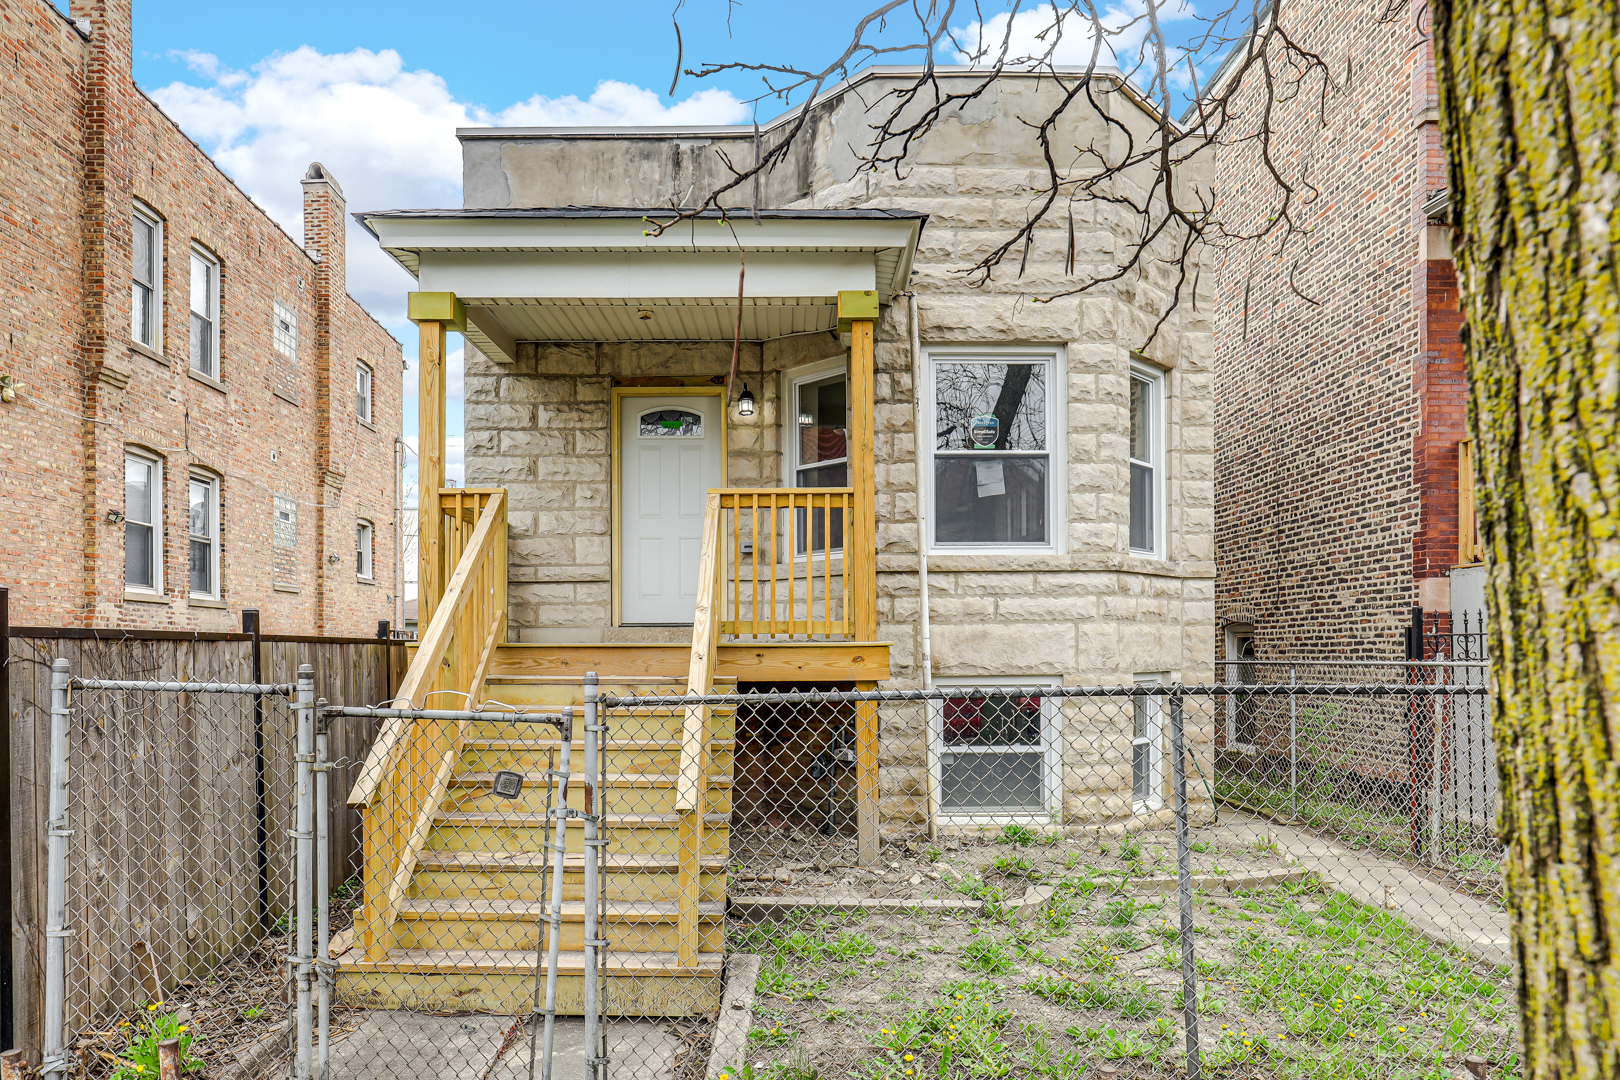 3 House in South Lawndale